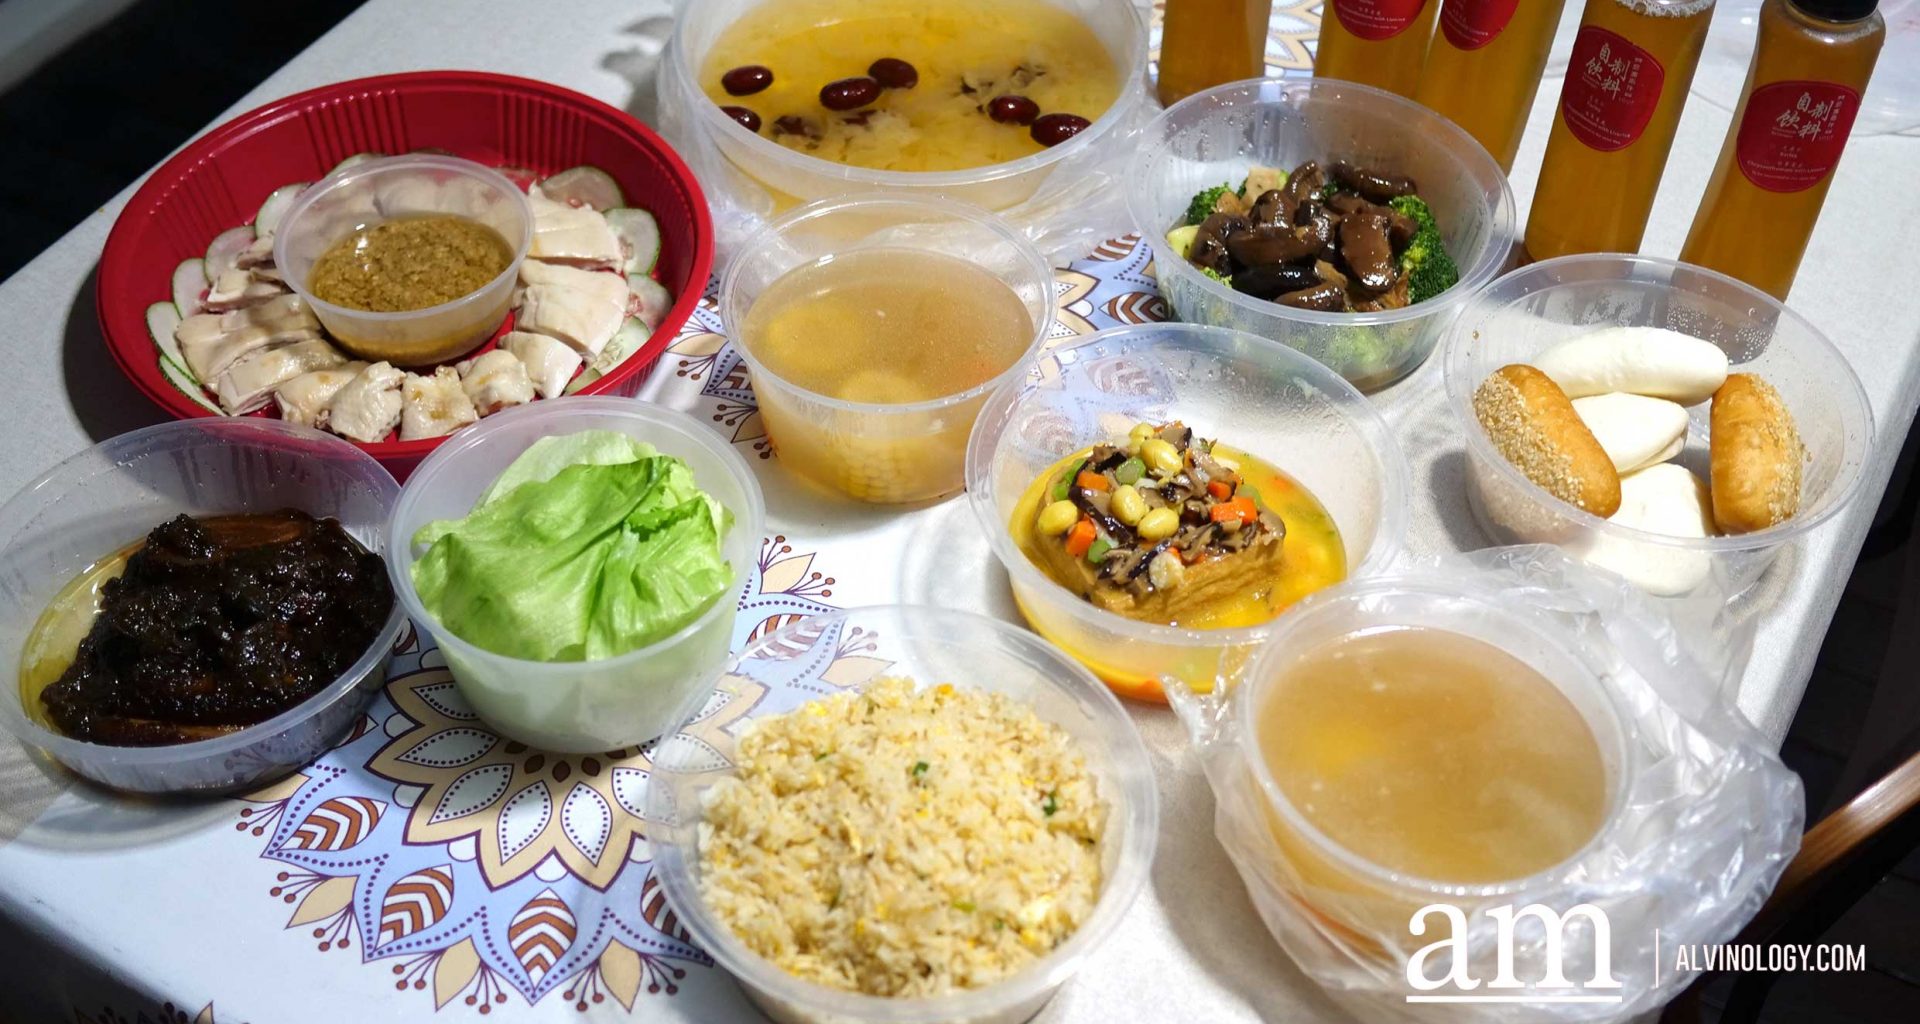 Soup Restaurant (三盅两件)’s Best of 2021 set - S$138 for a 7-course Feast - Alvinology